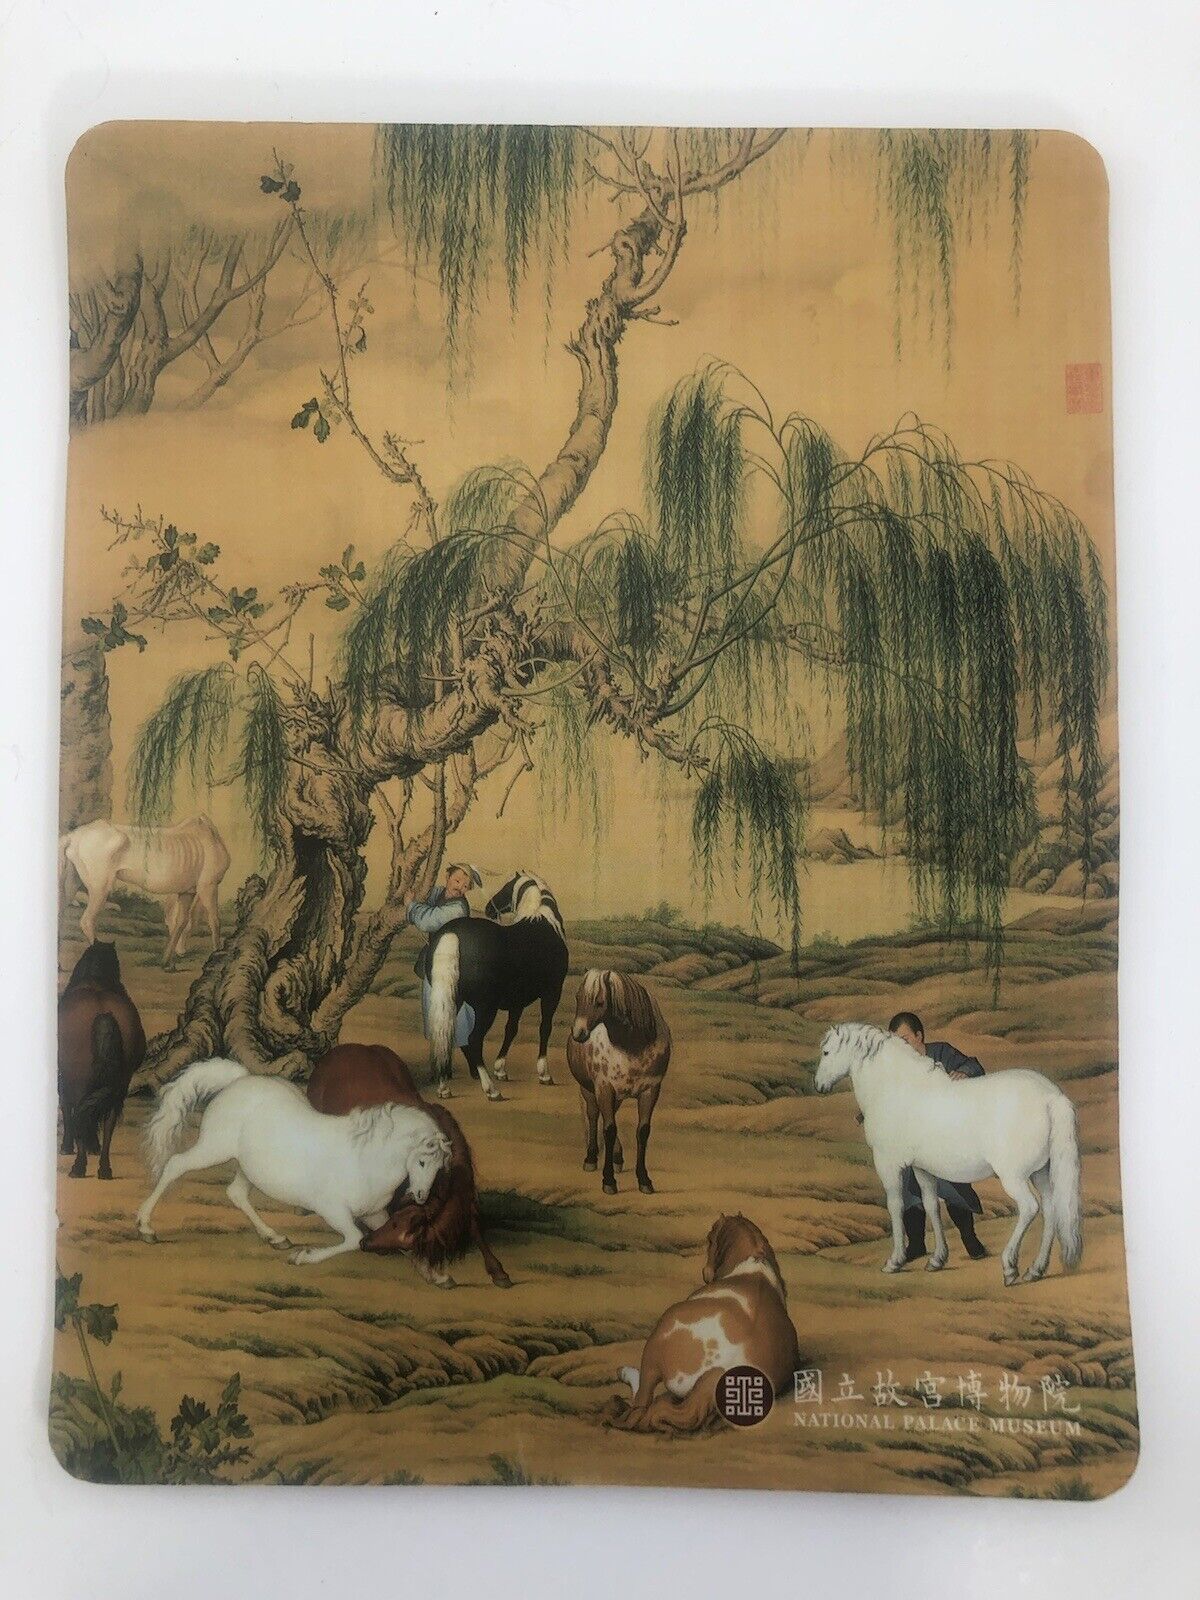 Museum Quality Art Mouse Pad from the National Palace Museum in Taiwan (R.O.C.)